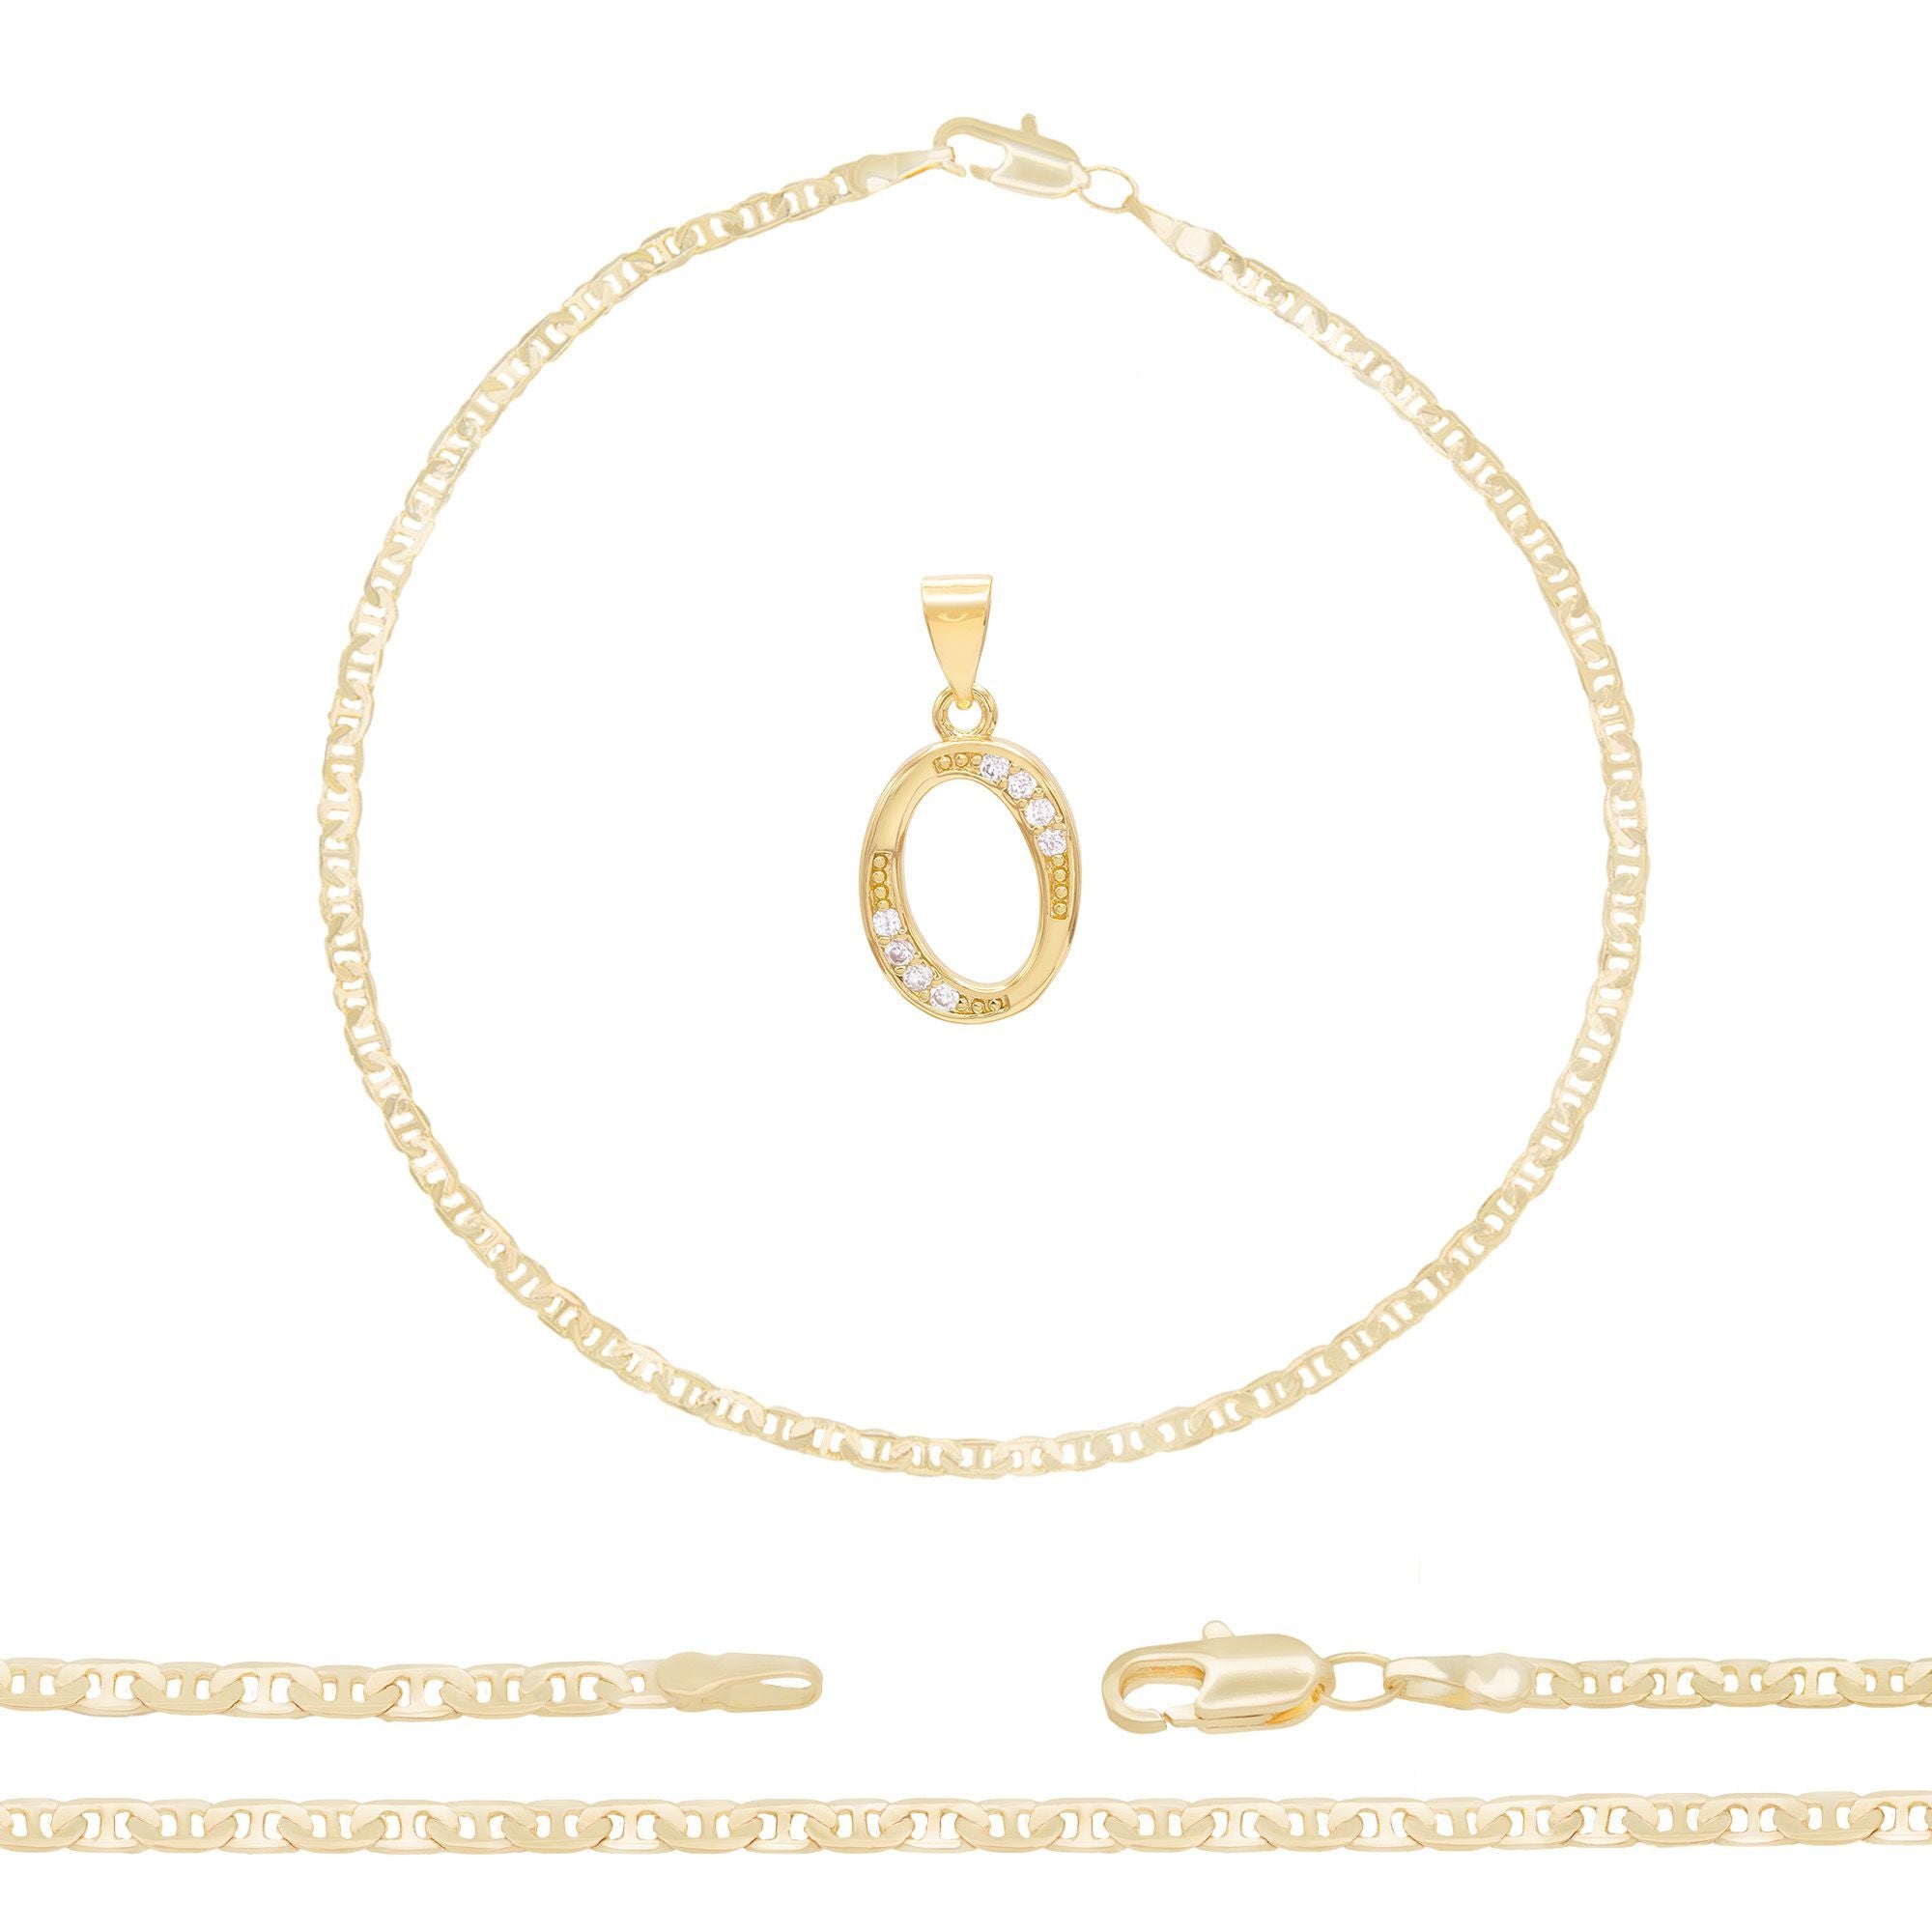 A-Z Initial Letter Pendant 14K Gold Filled Cubic Zirconia Mariner Chain Anklet 10" Set 3 mm  Women Jewelry